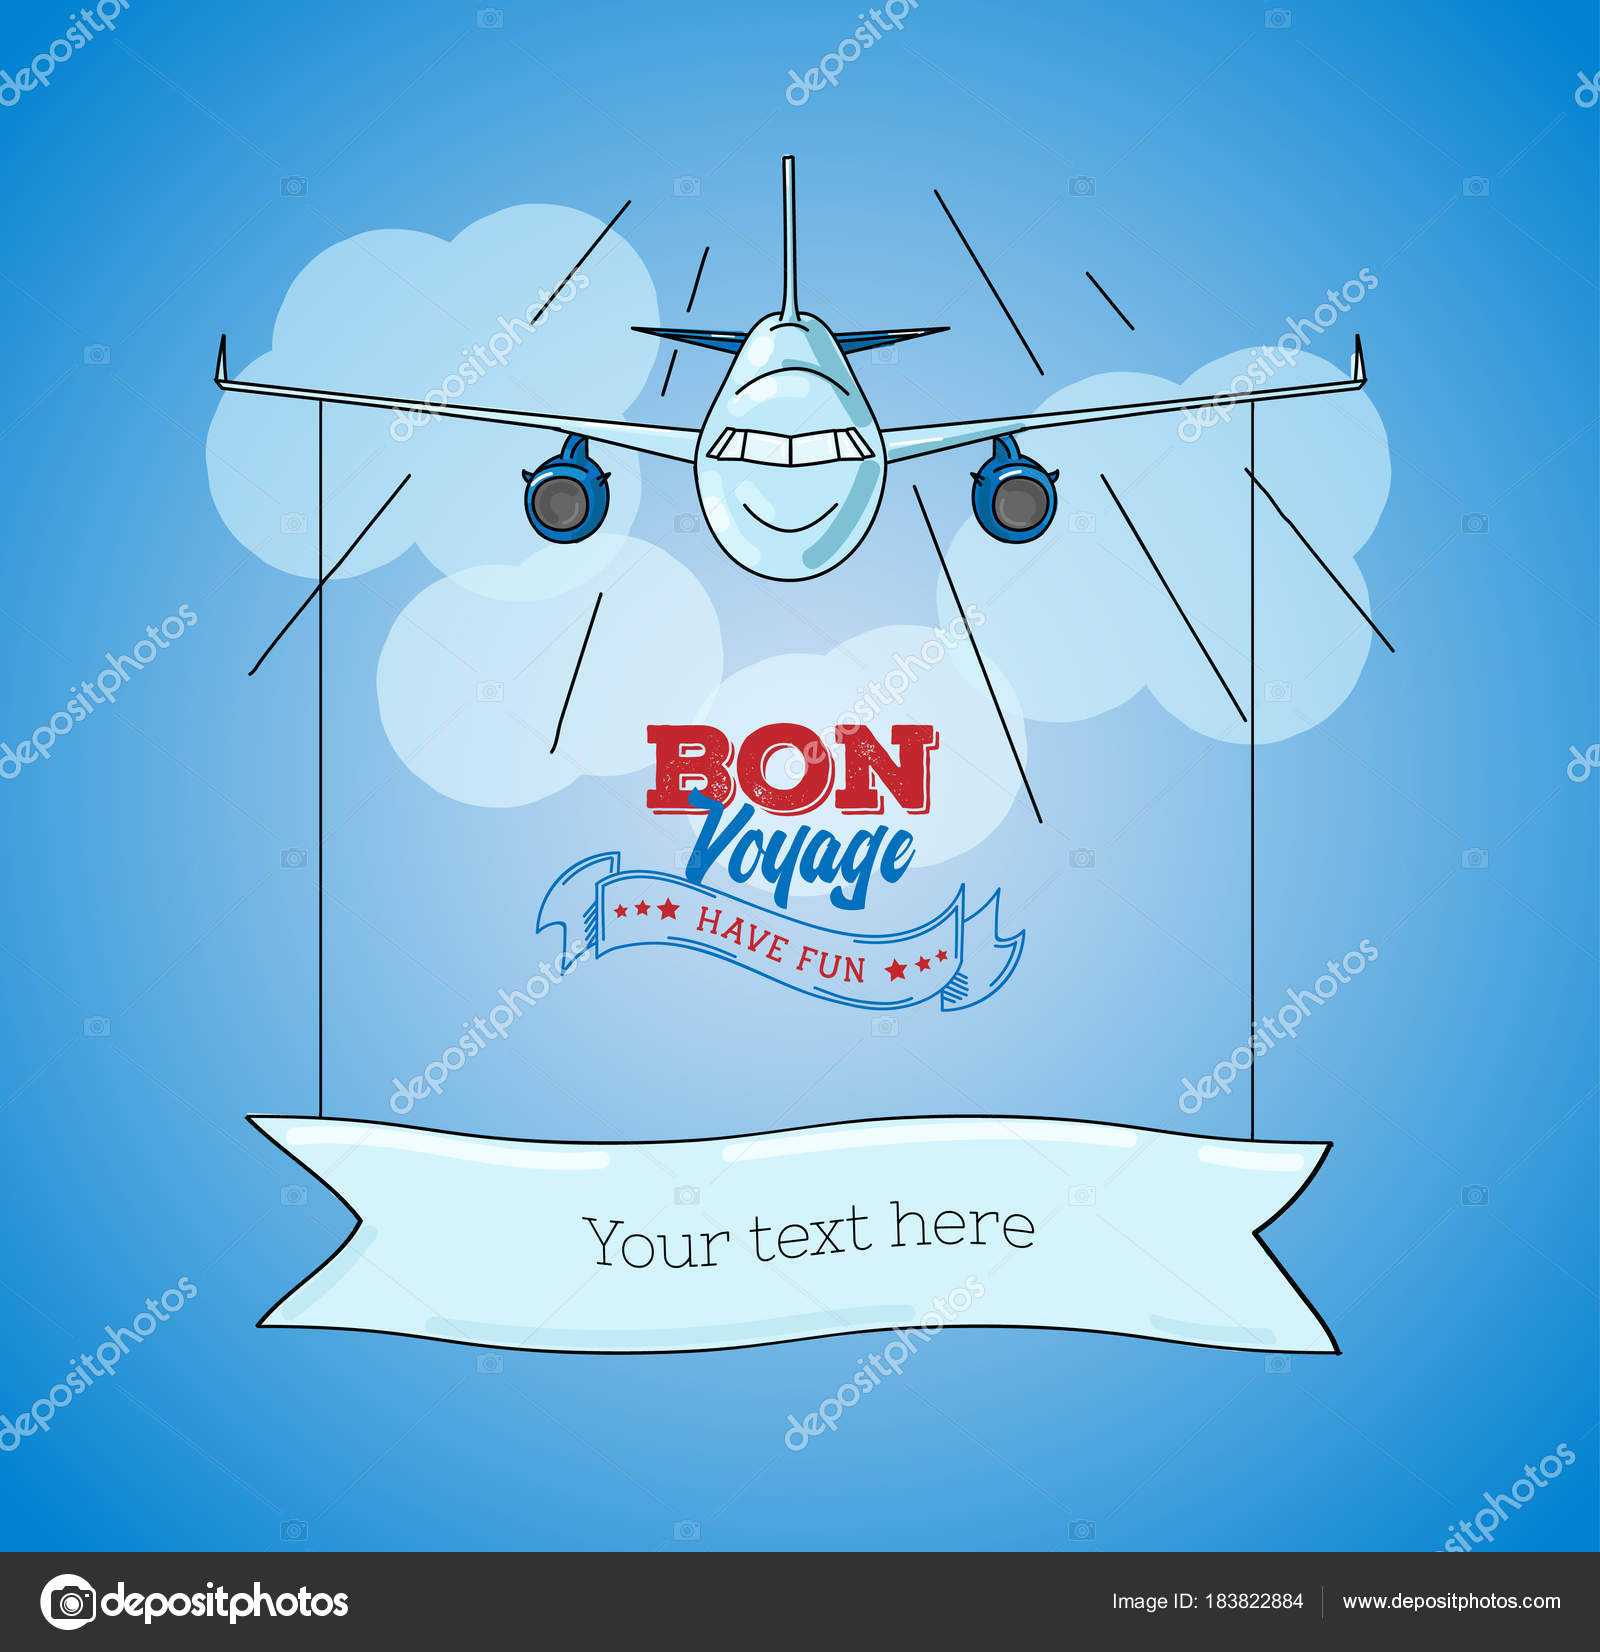 Card Template With Plane Graphic Illustration On Blue Sky Throughout Bon Voyage Card Template